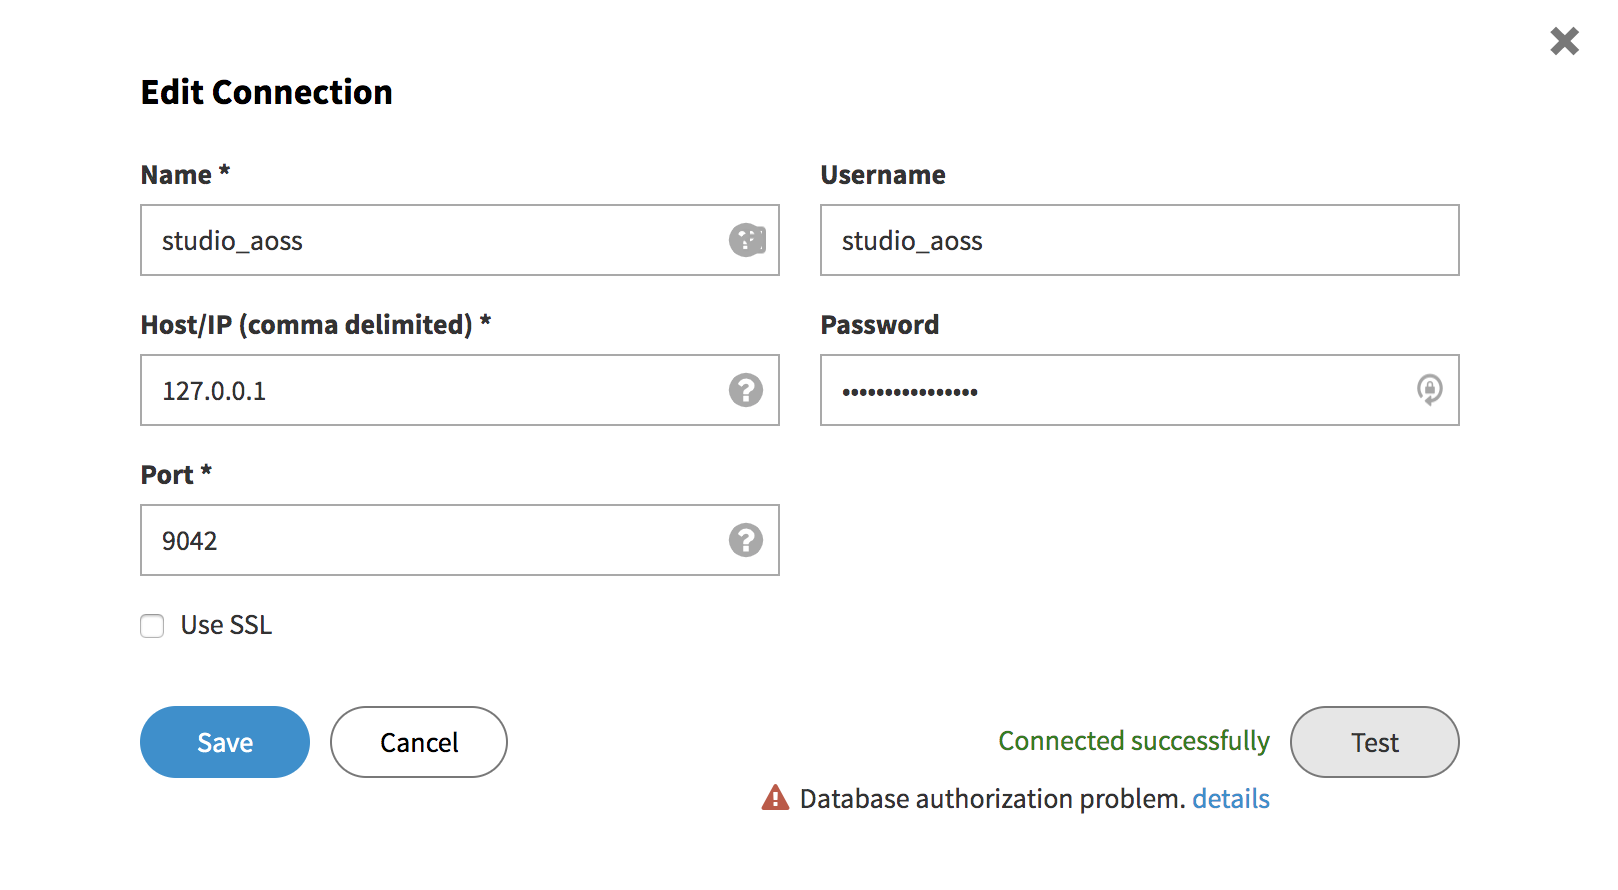 Edit Connection form with message indicating Database authorization problem and details link